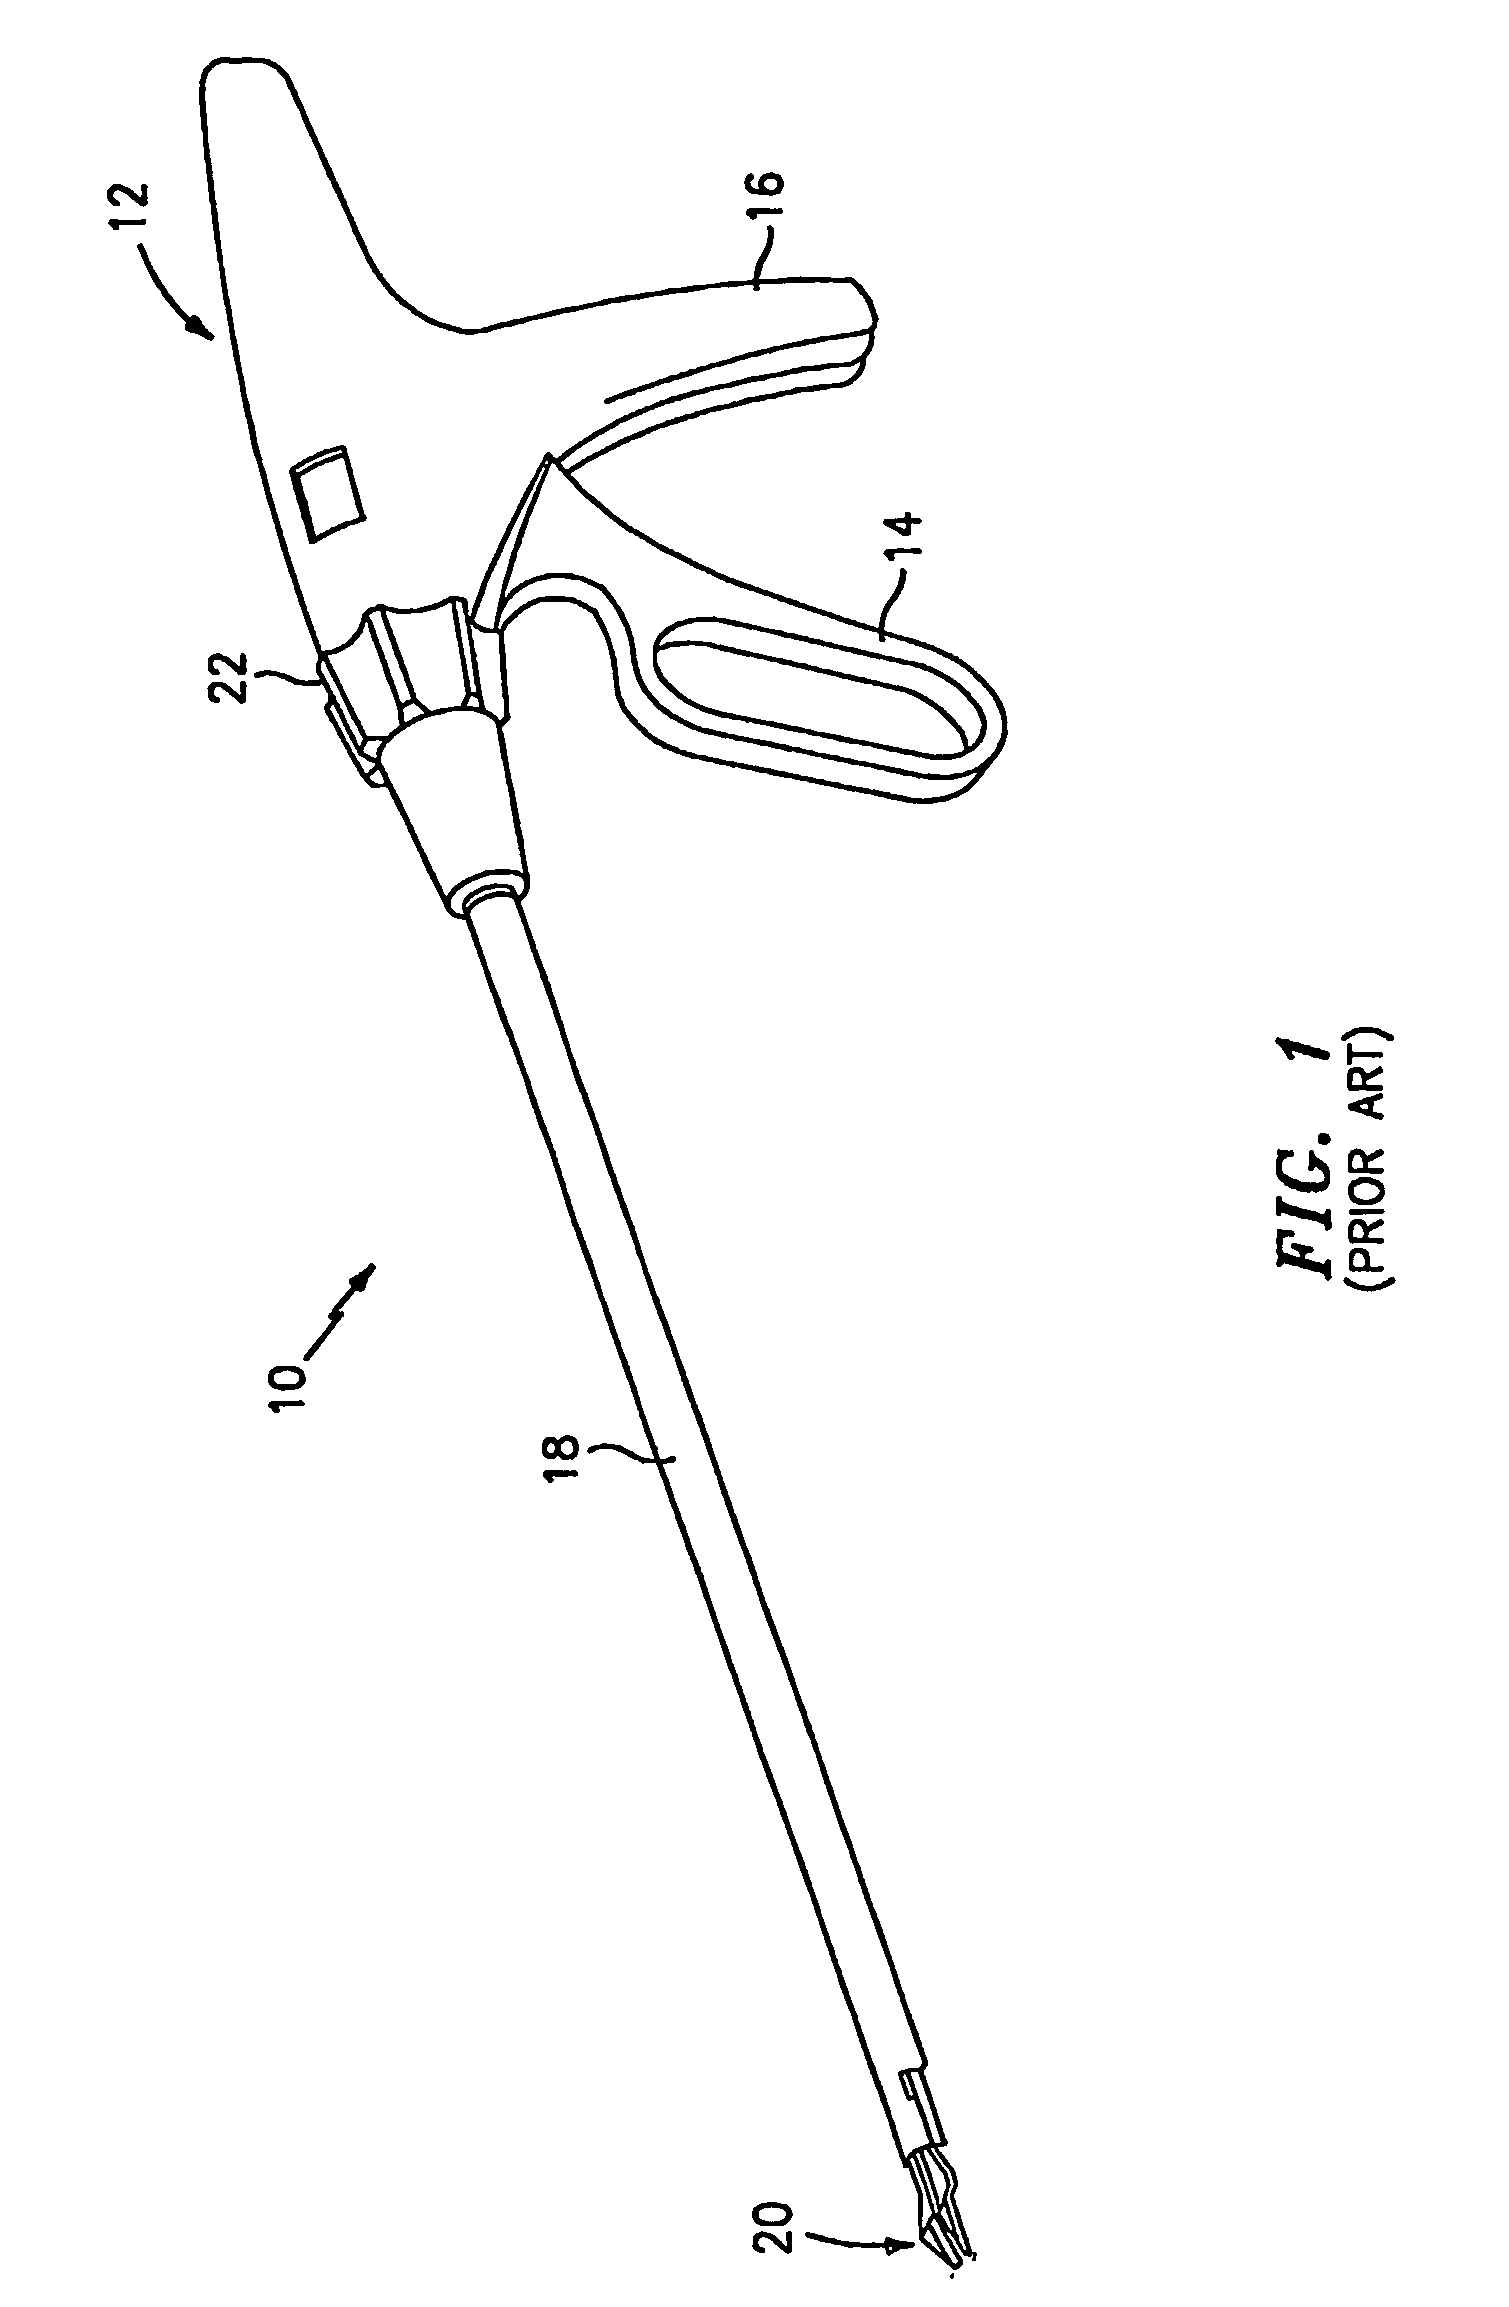 Surgical clip applier with high torque jaws